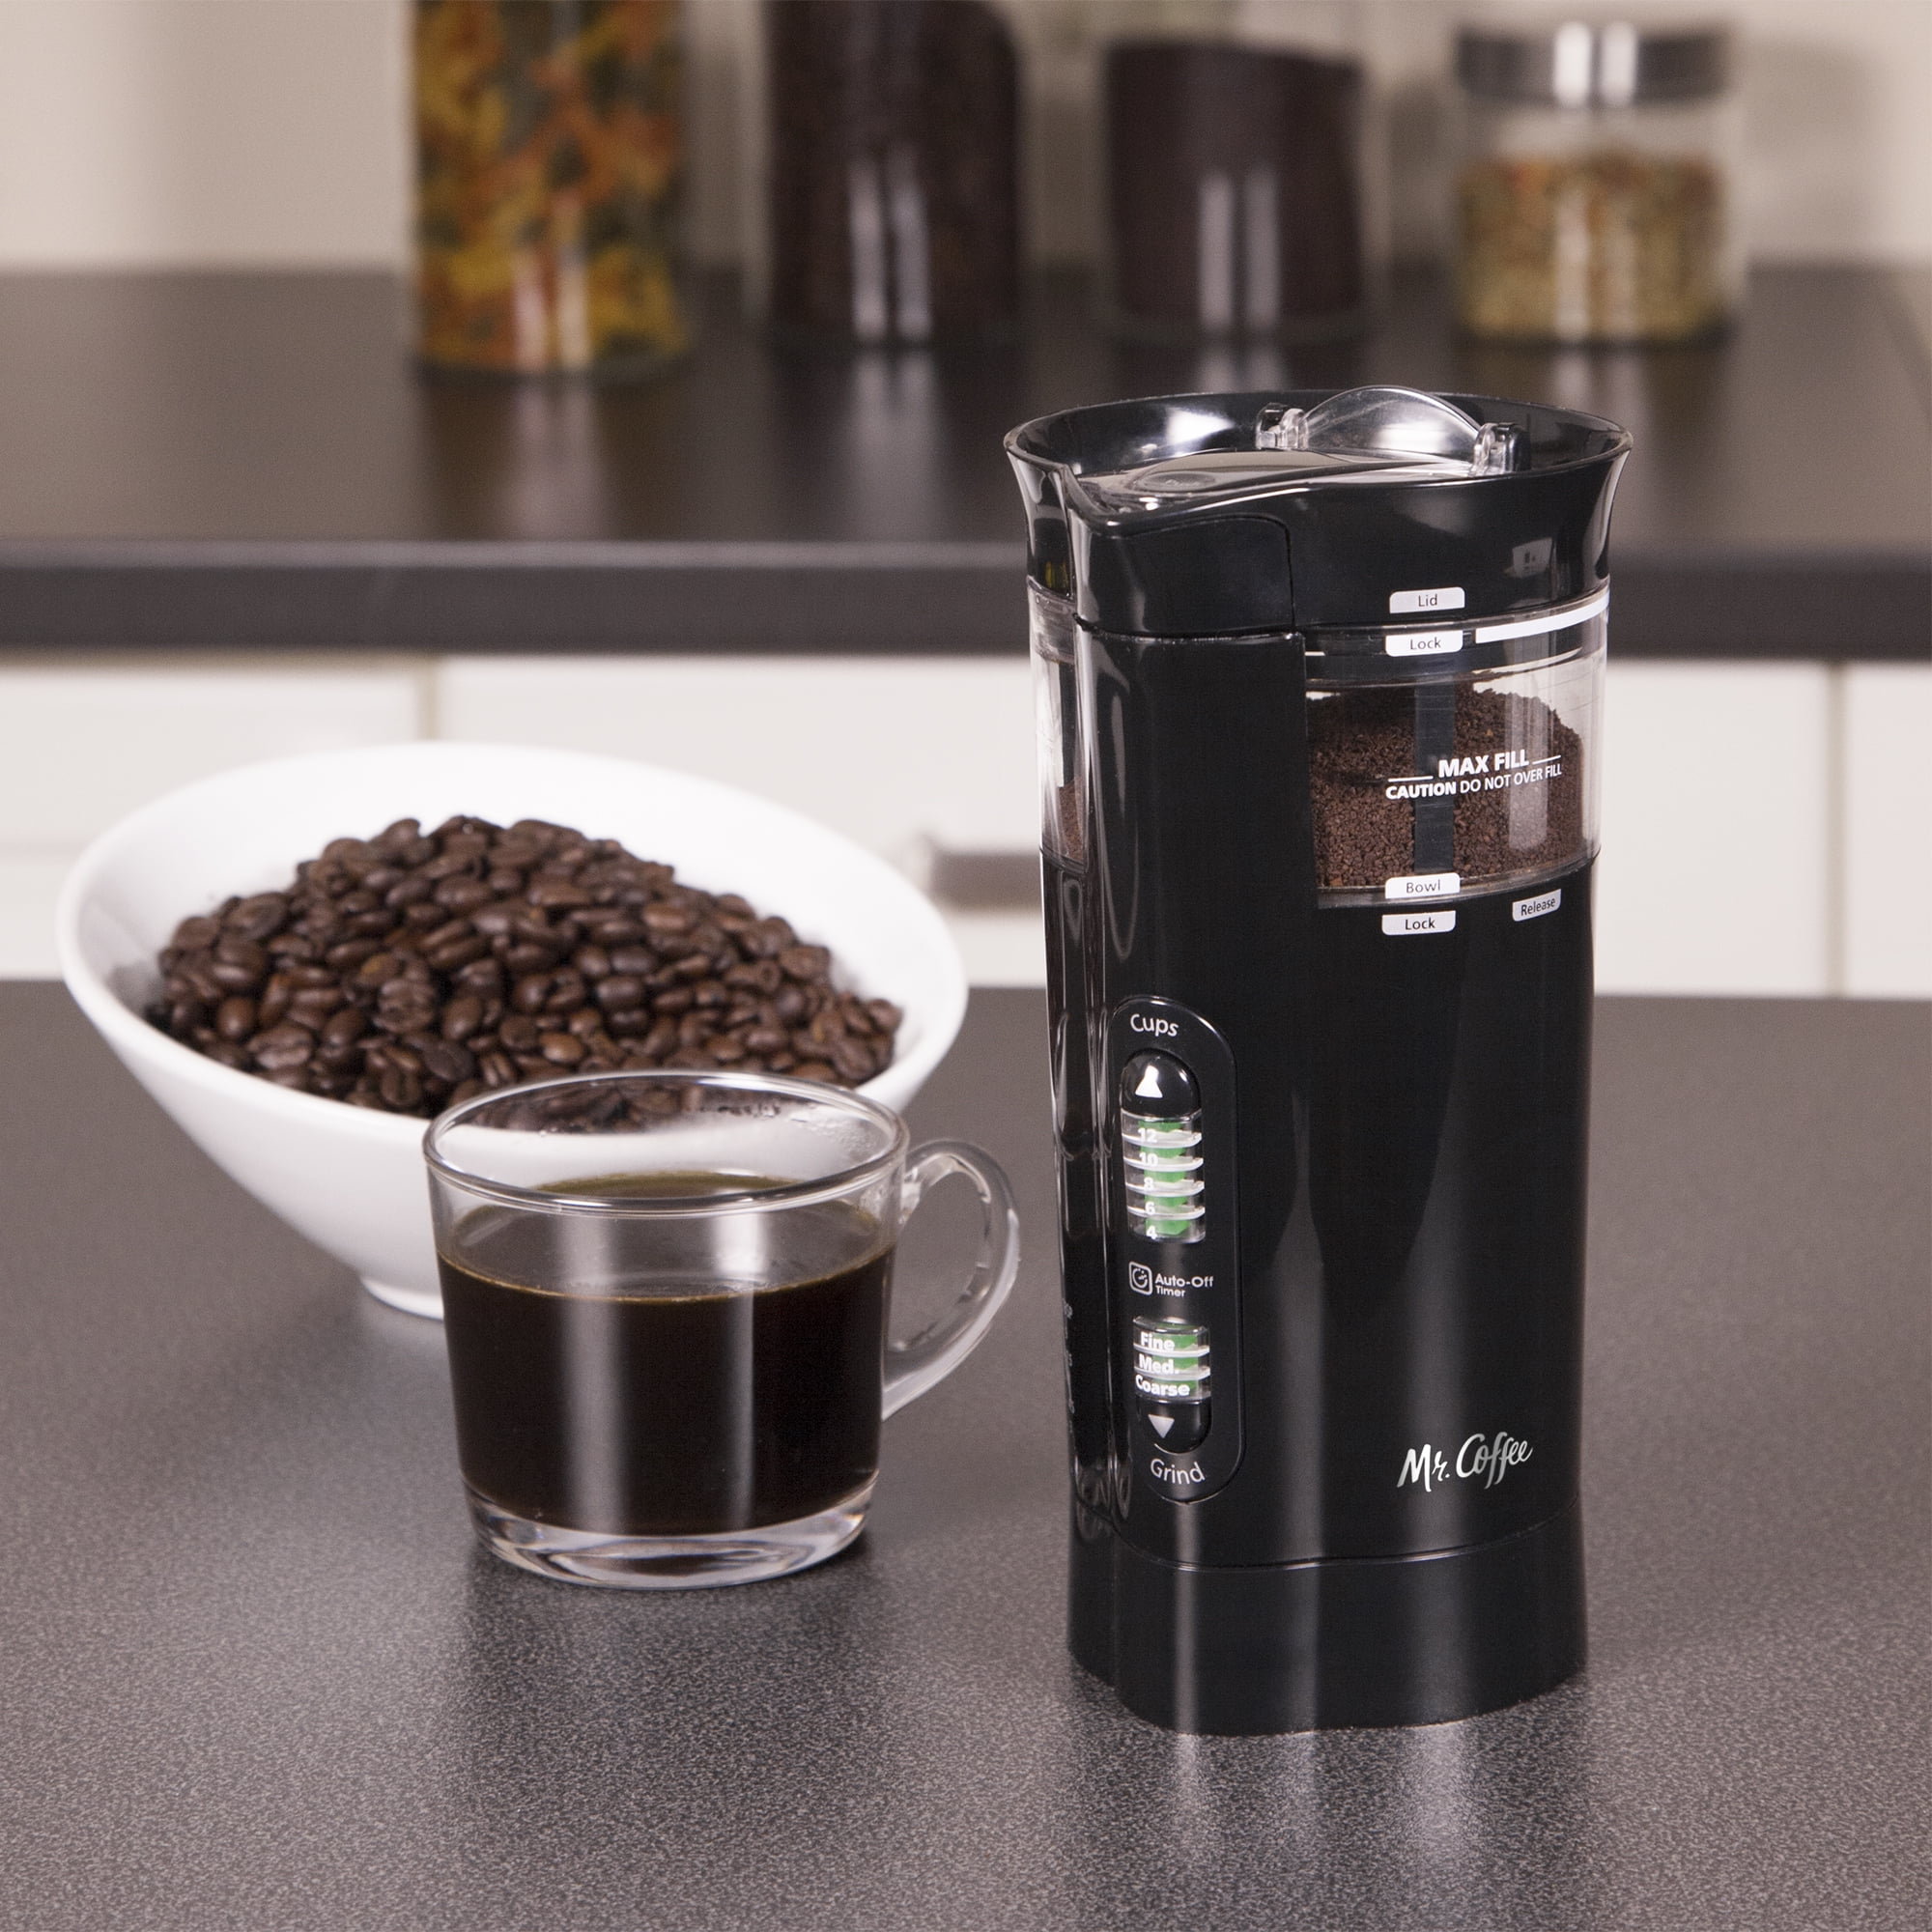 RIDS55-NP Mr. Coffee 12-cup White Coffee Grinder (case pack 4 pcs